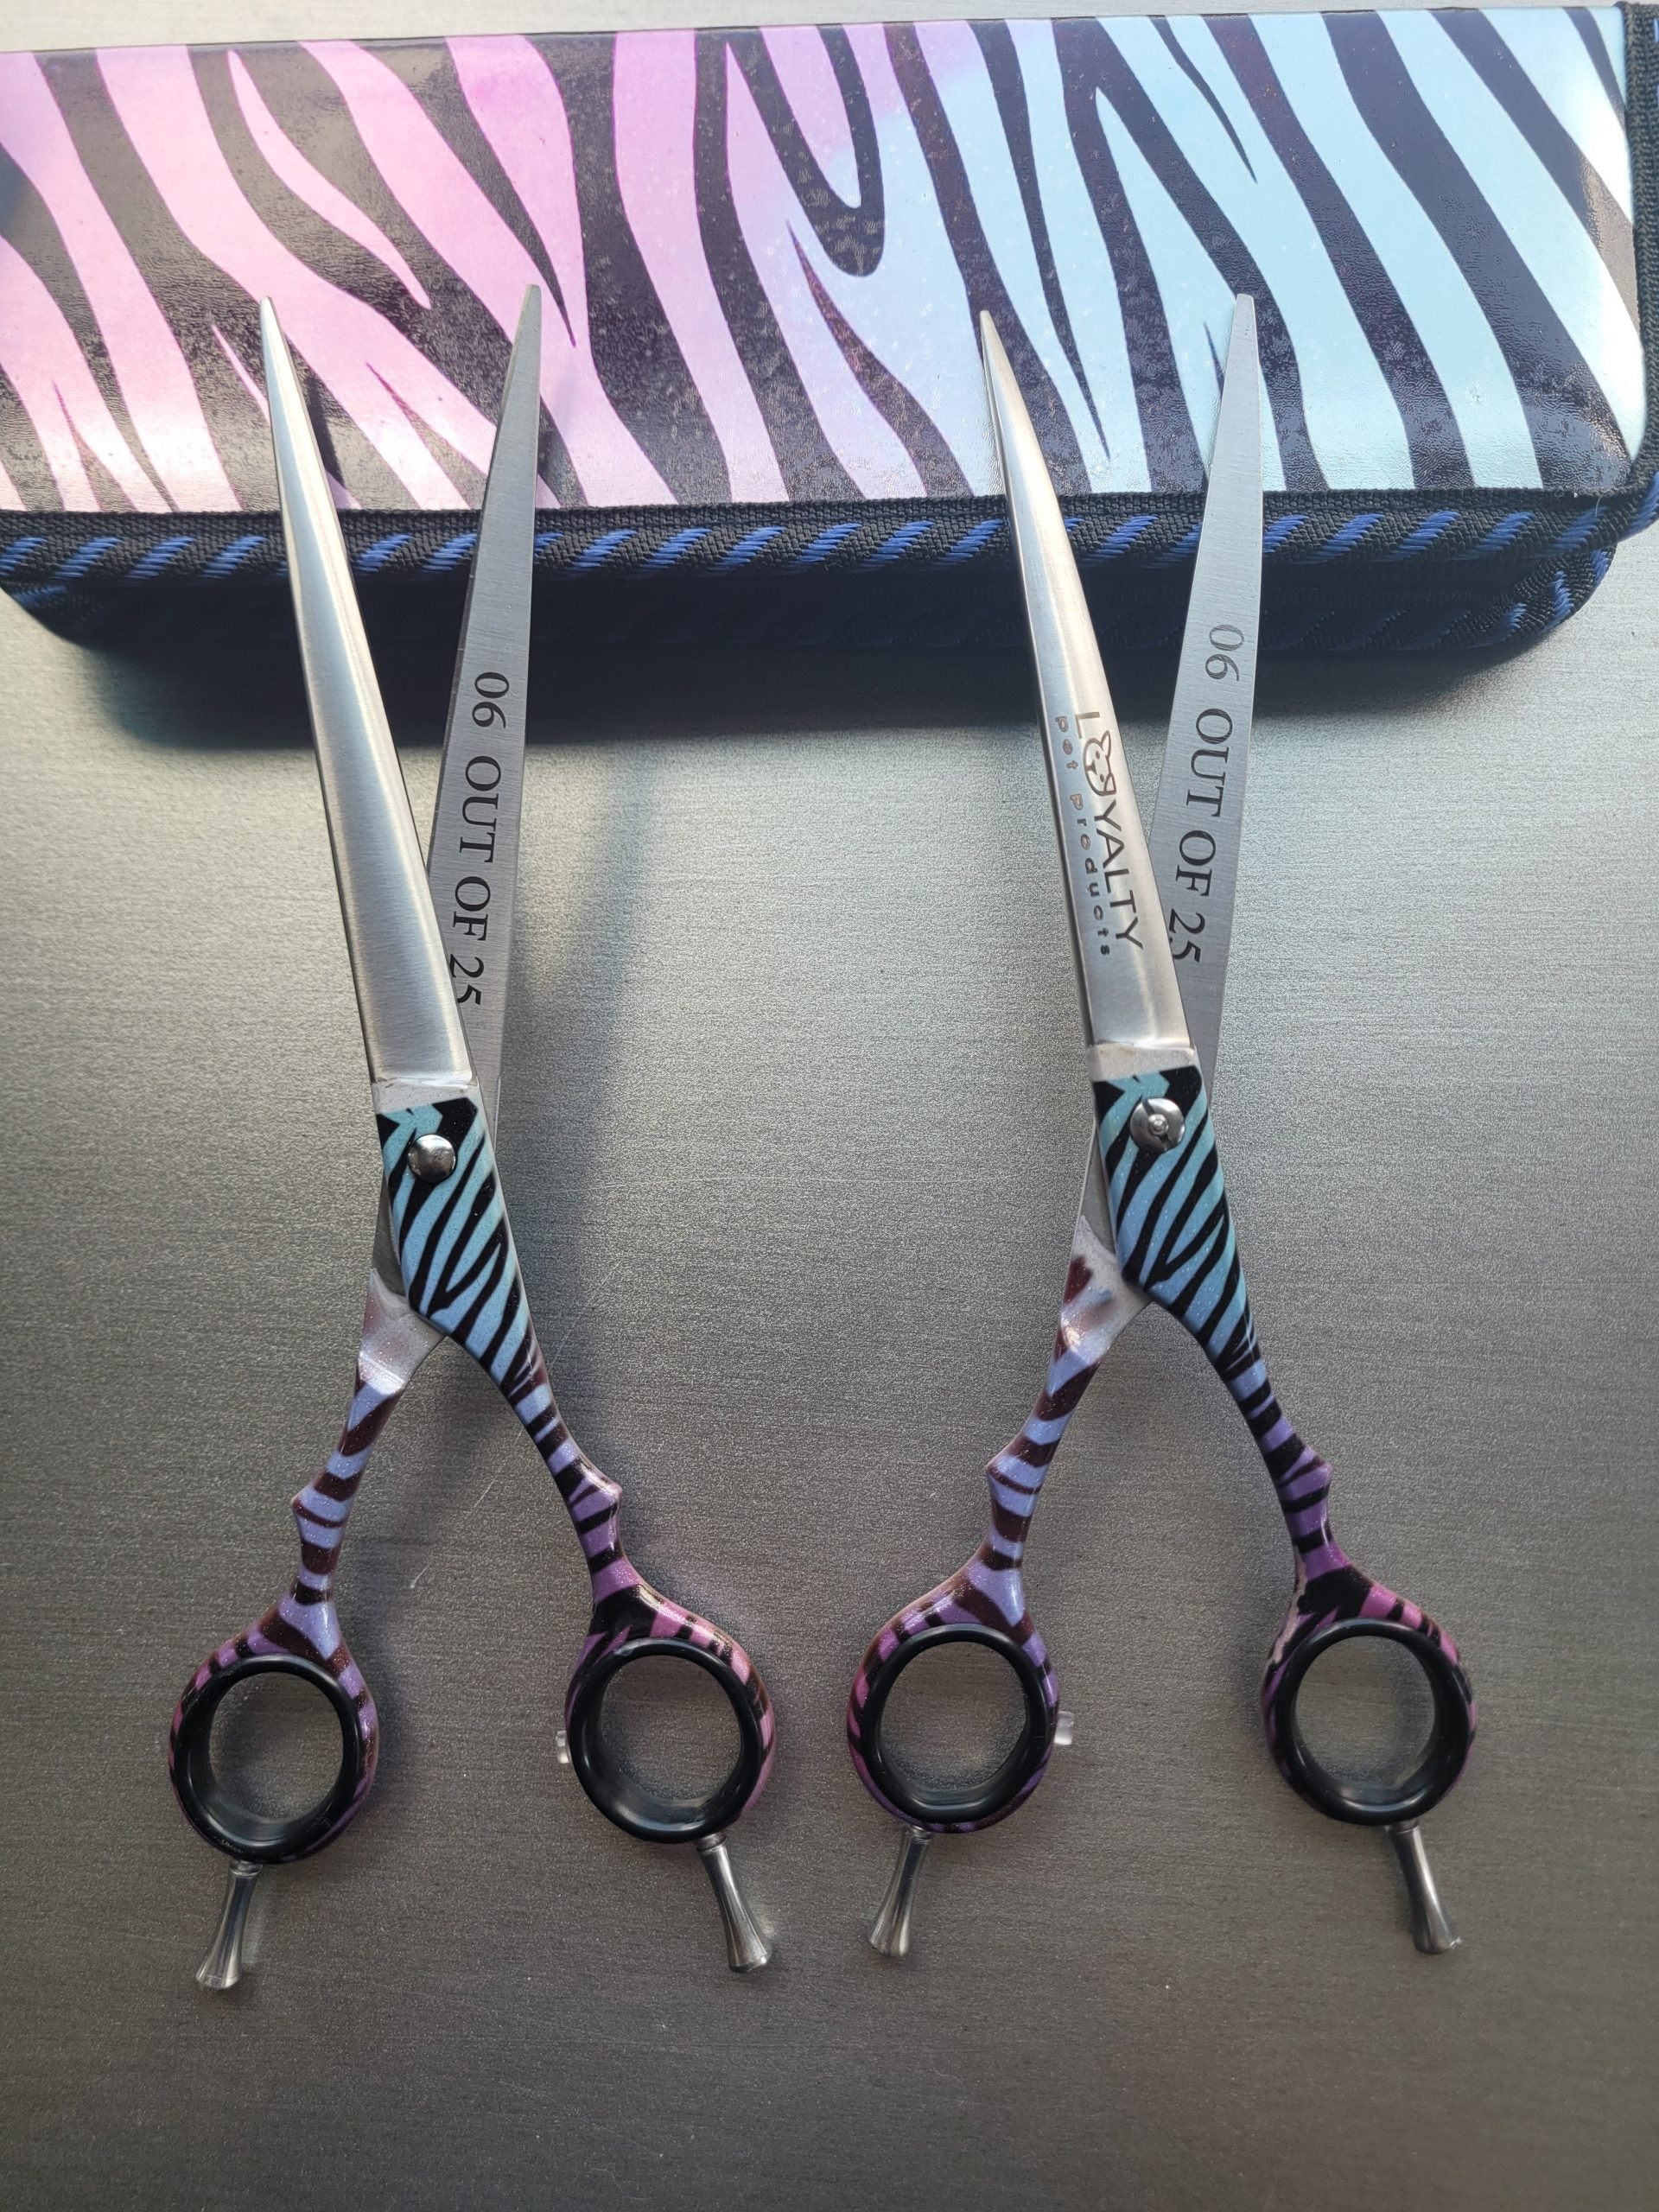 Loyalty Pet “Wild Side” 2 pc Shear Set With Matching Shear Case + Gifts